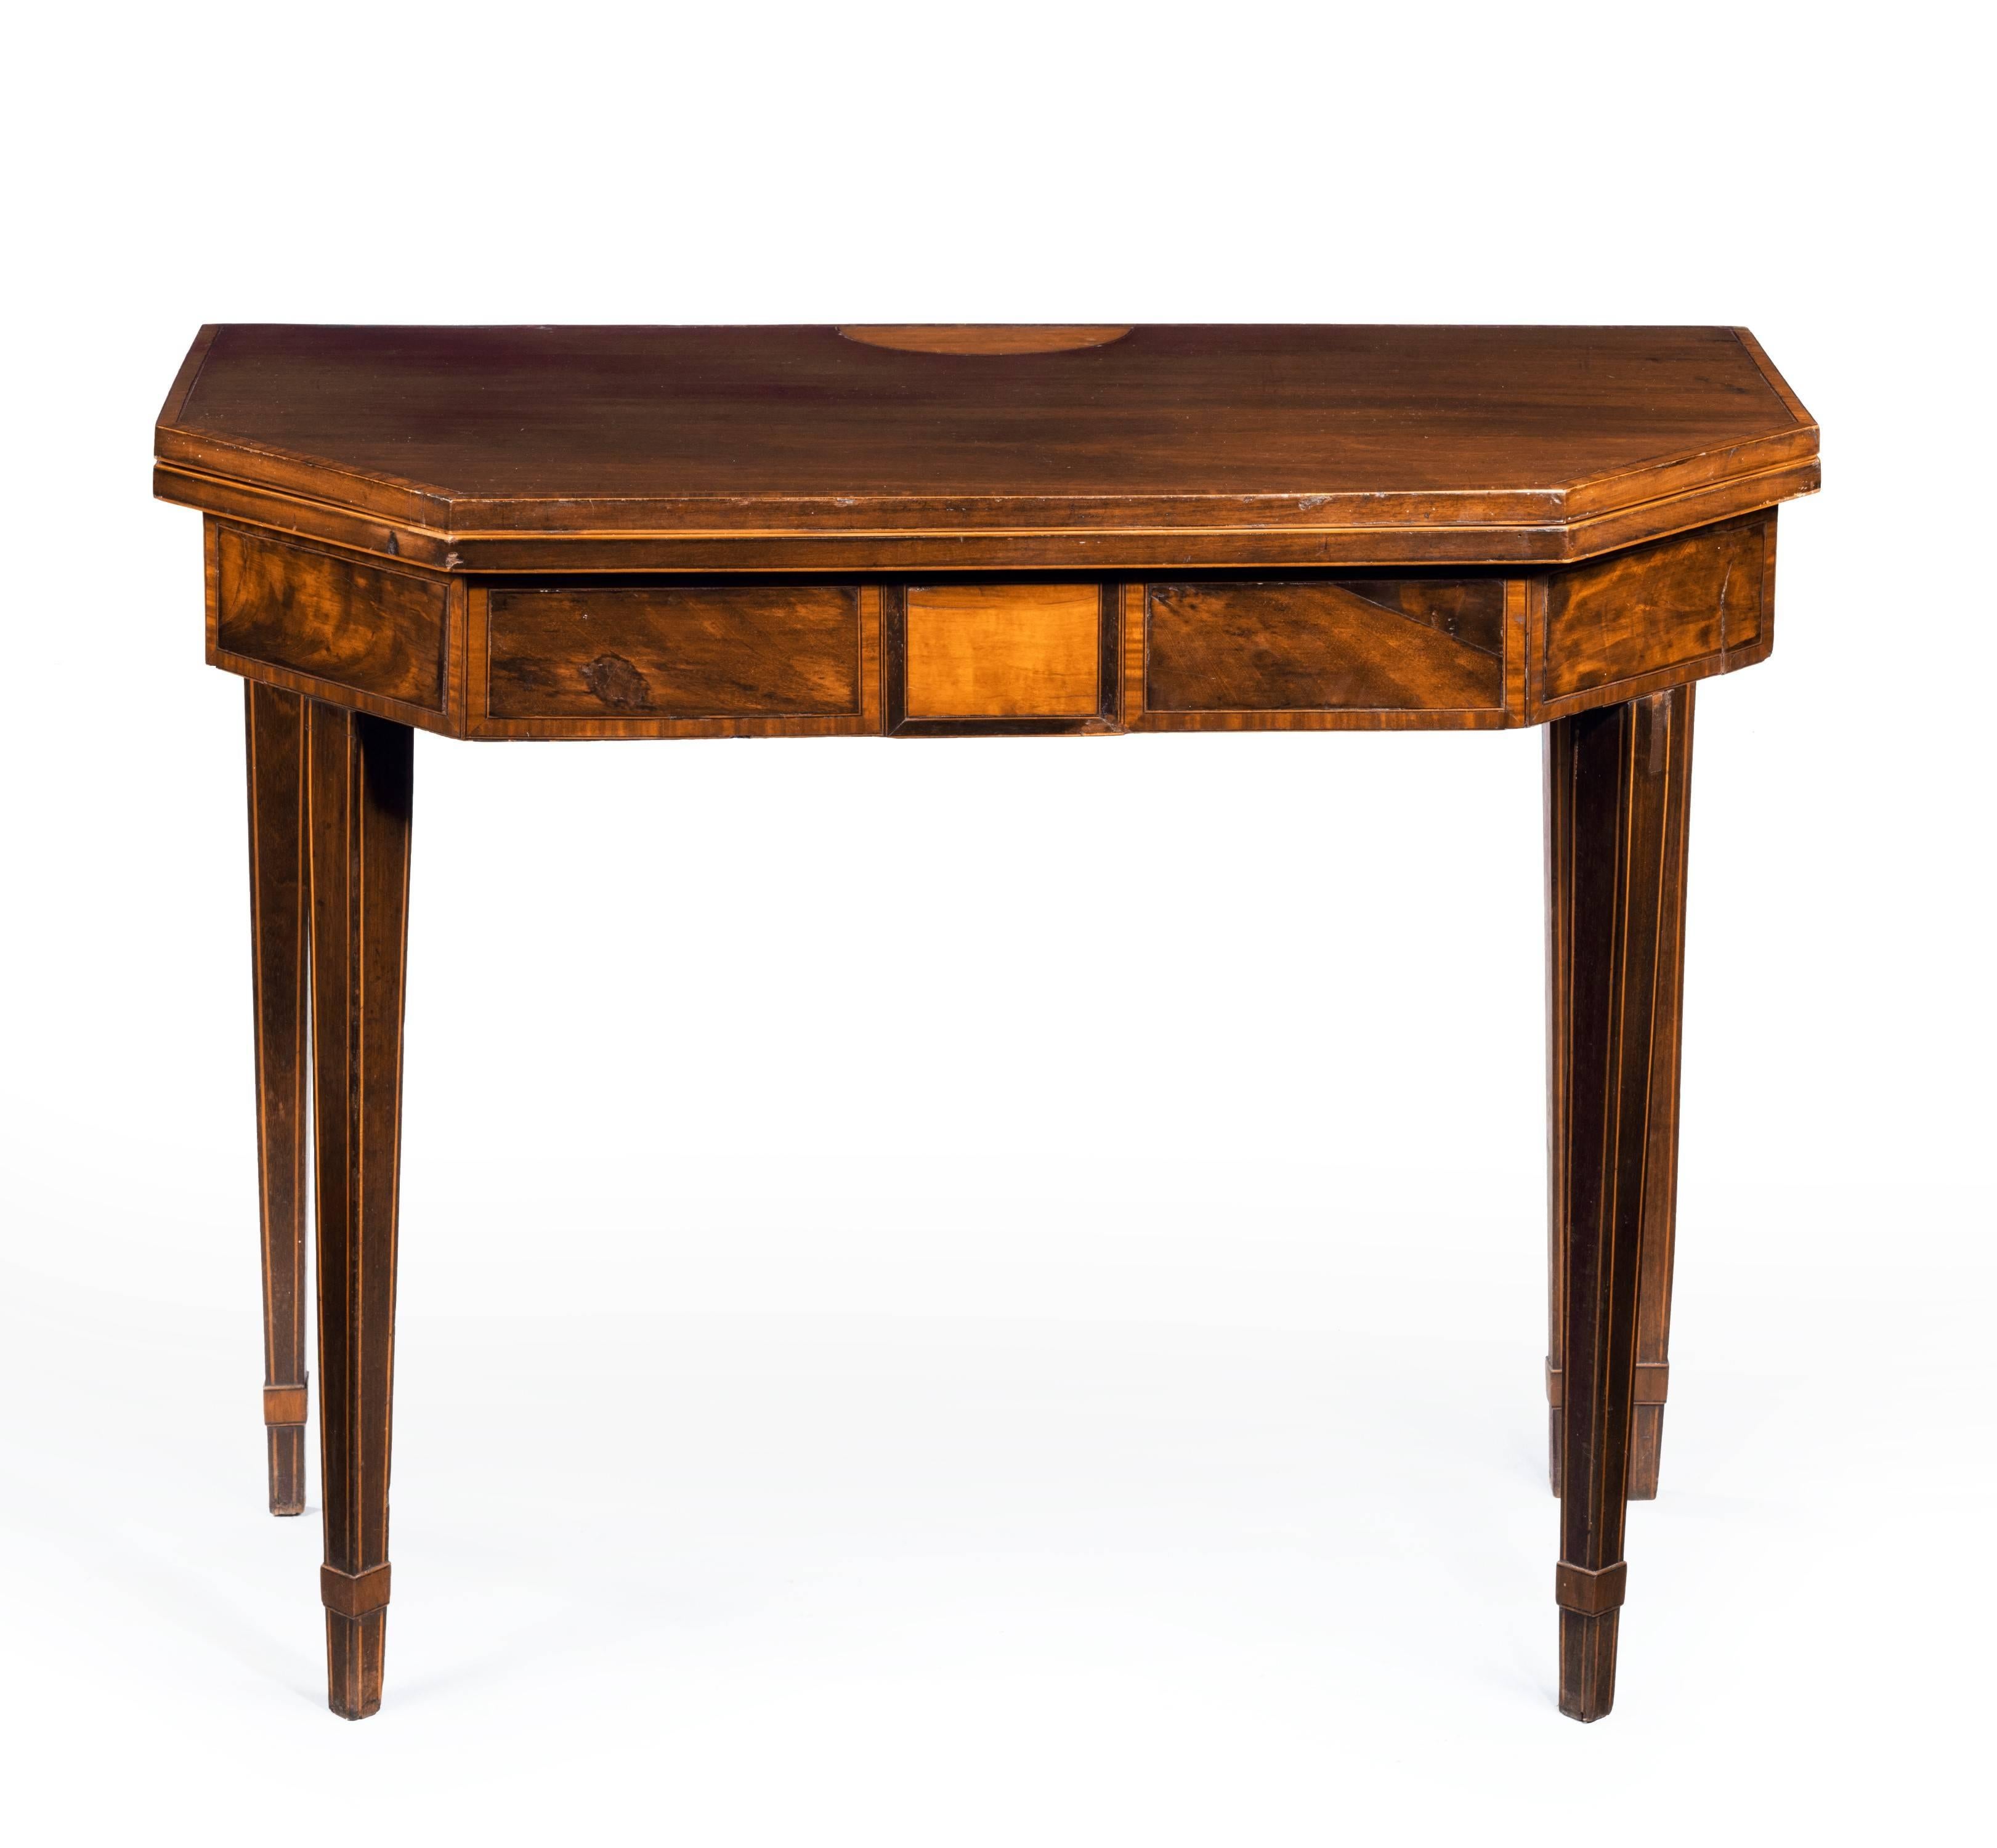 A good George III period mahogany tea table. Overall crossbanded with kingwood lined with ebony and satinwood. Tapering square section supports.